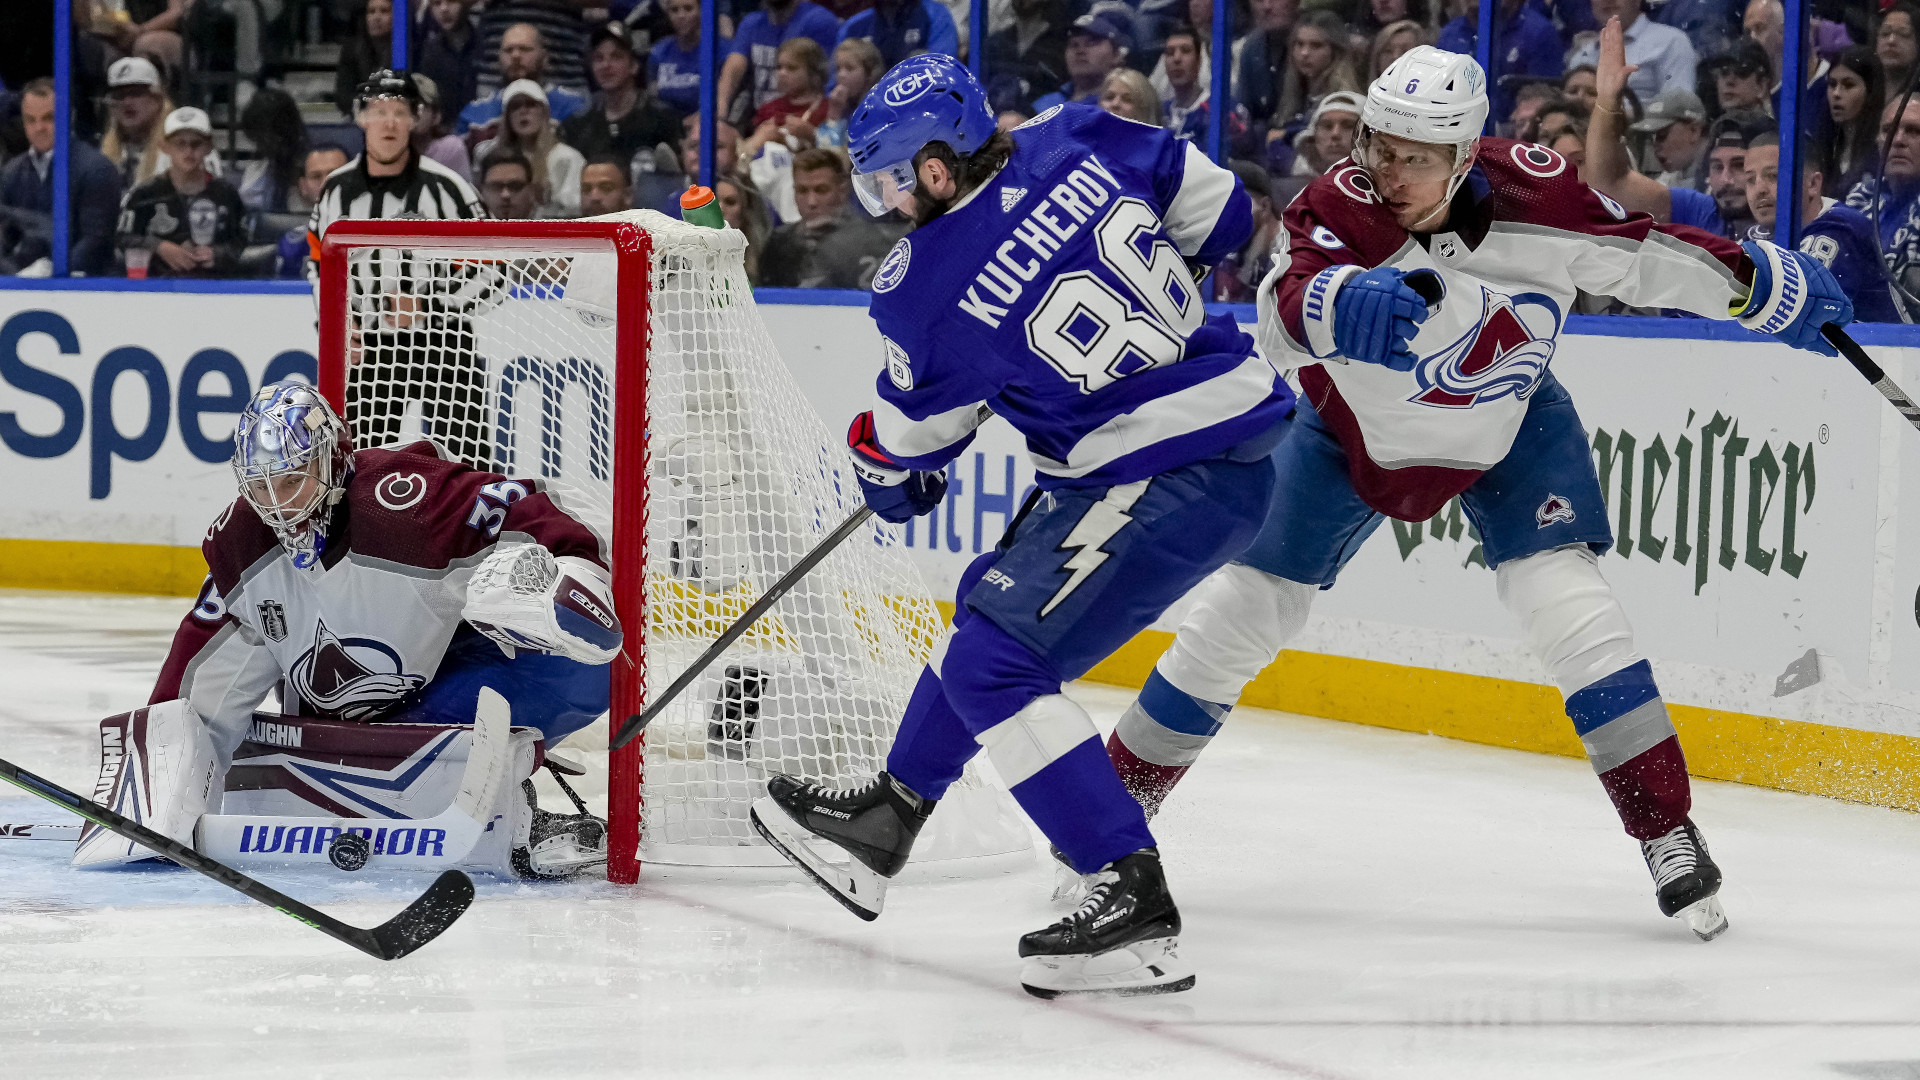 Avalanche Vs Lightning Live Stream How To Watch 2022 Stanley Cup Finals Game 4 Online Bolts 